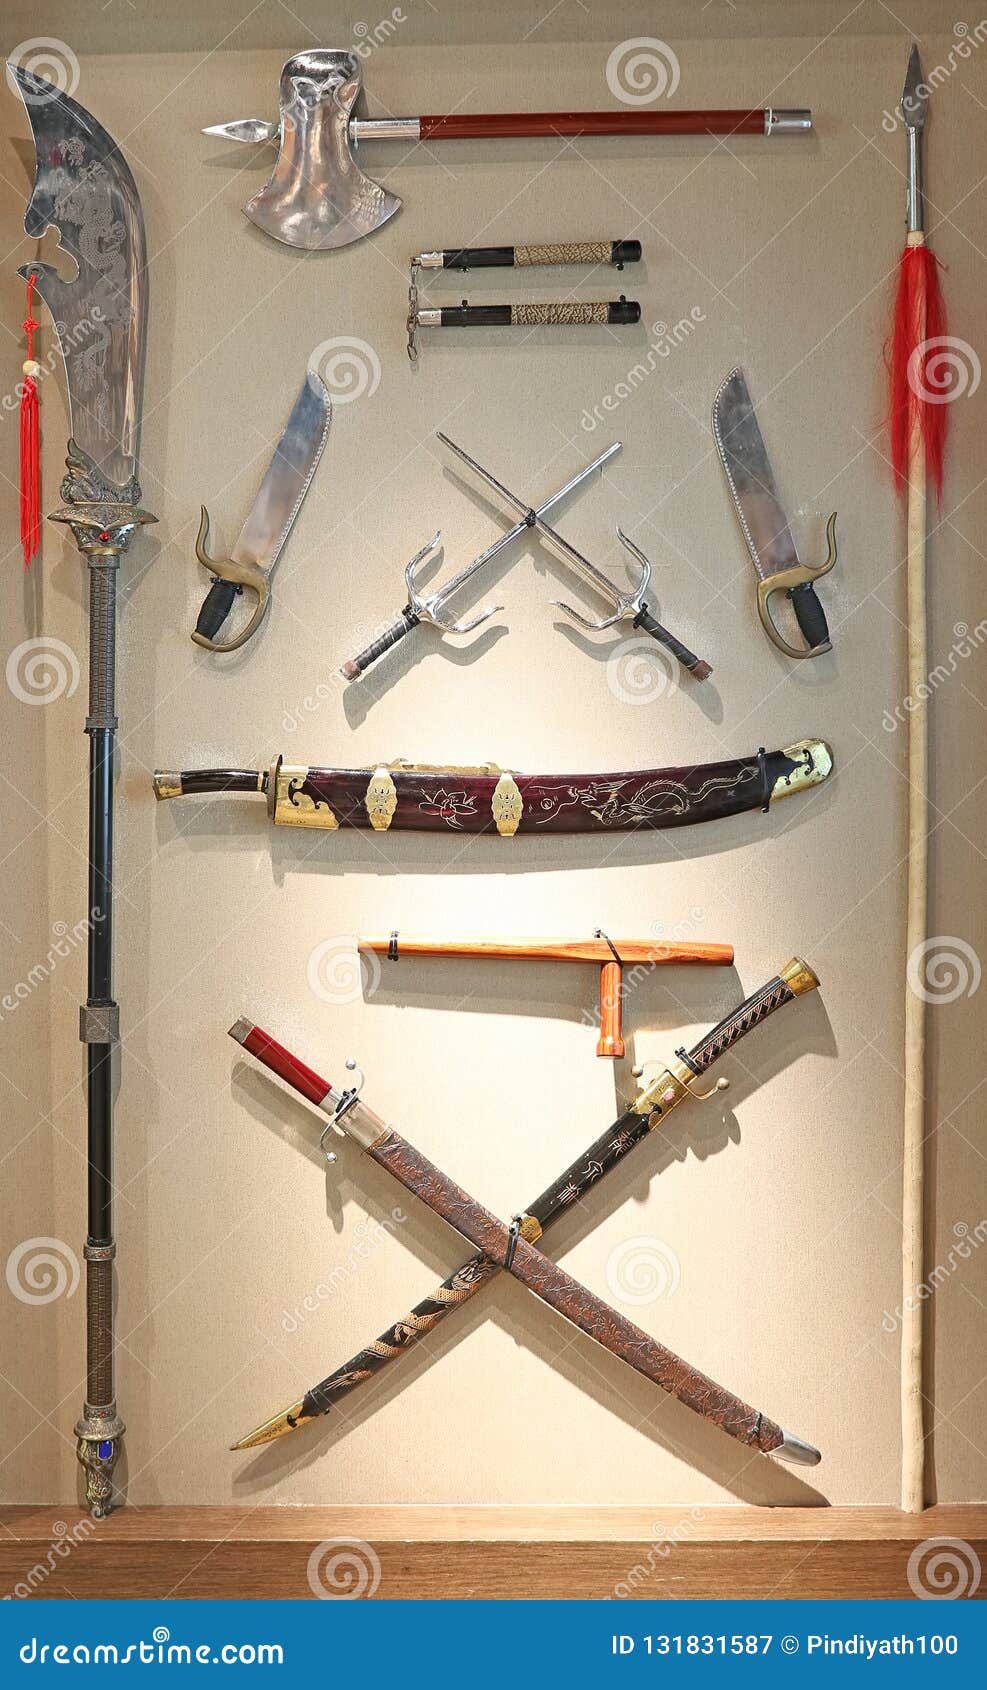 Various Type Chinese Martial Arts Weaponry Displayed Madame Tussauds Hong Kong Chinese Martial Arts Weapons Display 131831587 